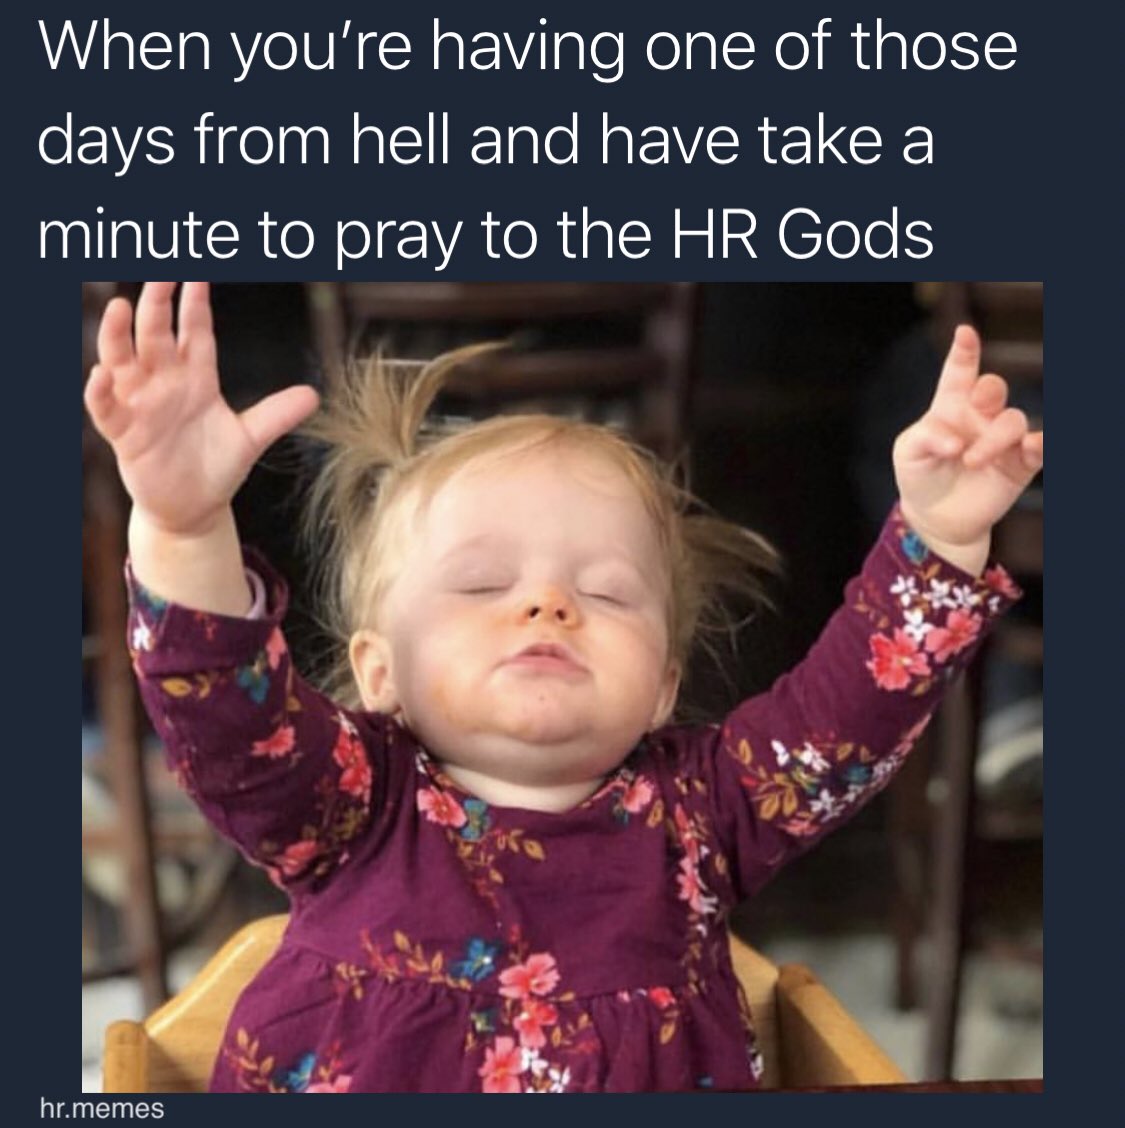 ropay on X: Remember, HR is always watching👀 #memefriday. What's your  funniest HR encounter? Share in the comments!👇🏽   / X